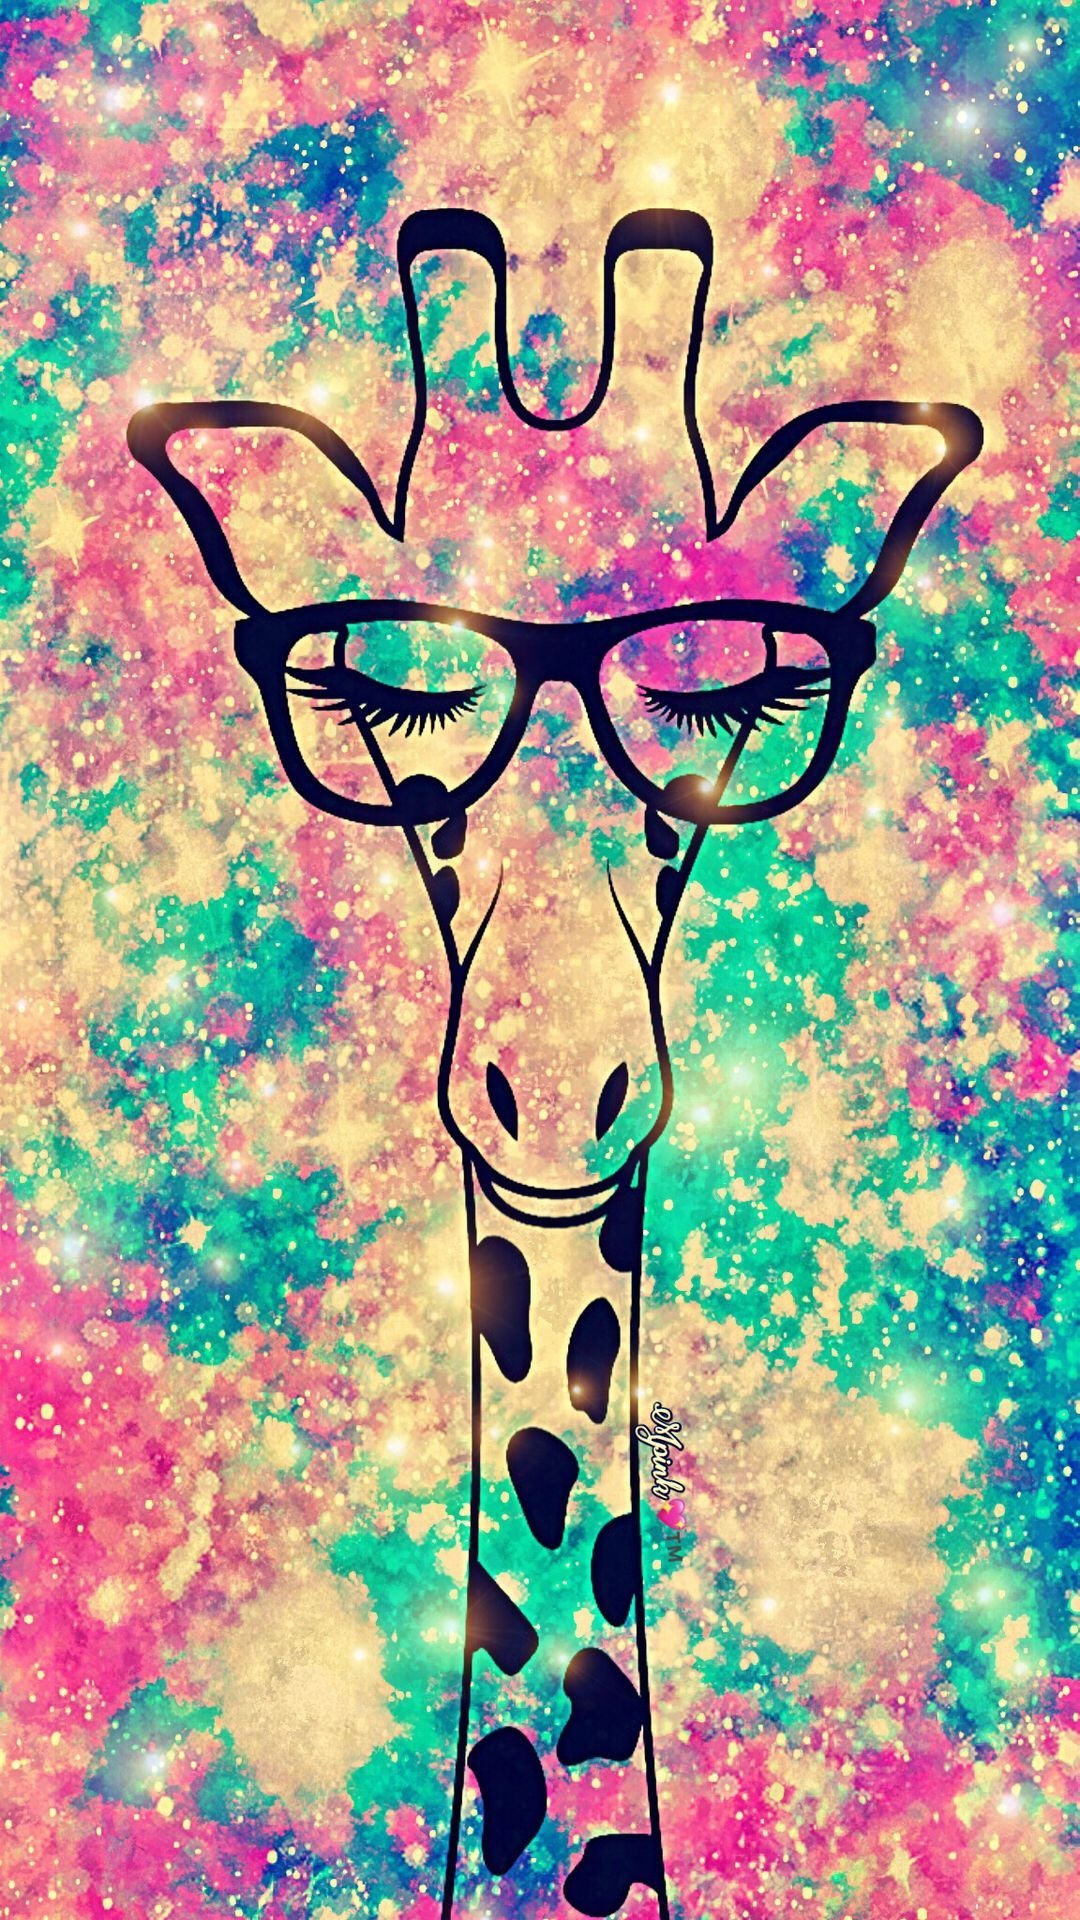 Hipster distinction, Iphone compatible, Aesthetic appeal, Contemporary design, Artistic expression, 1080x1920 Full HD Handy